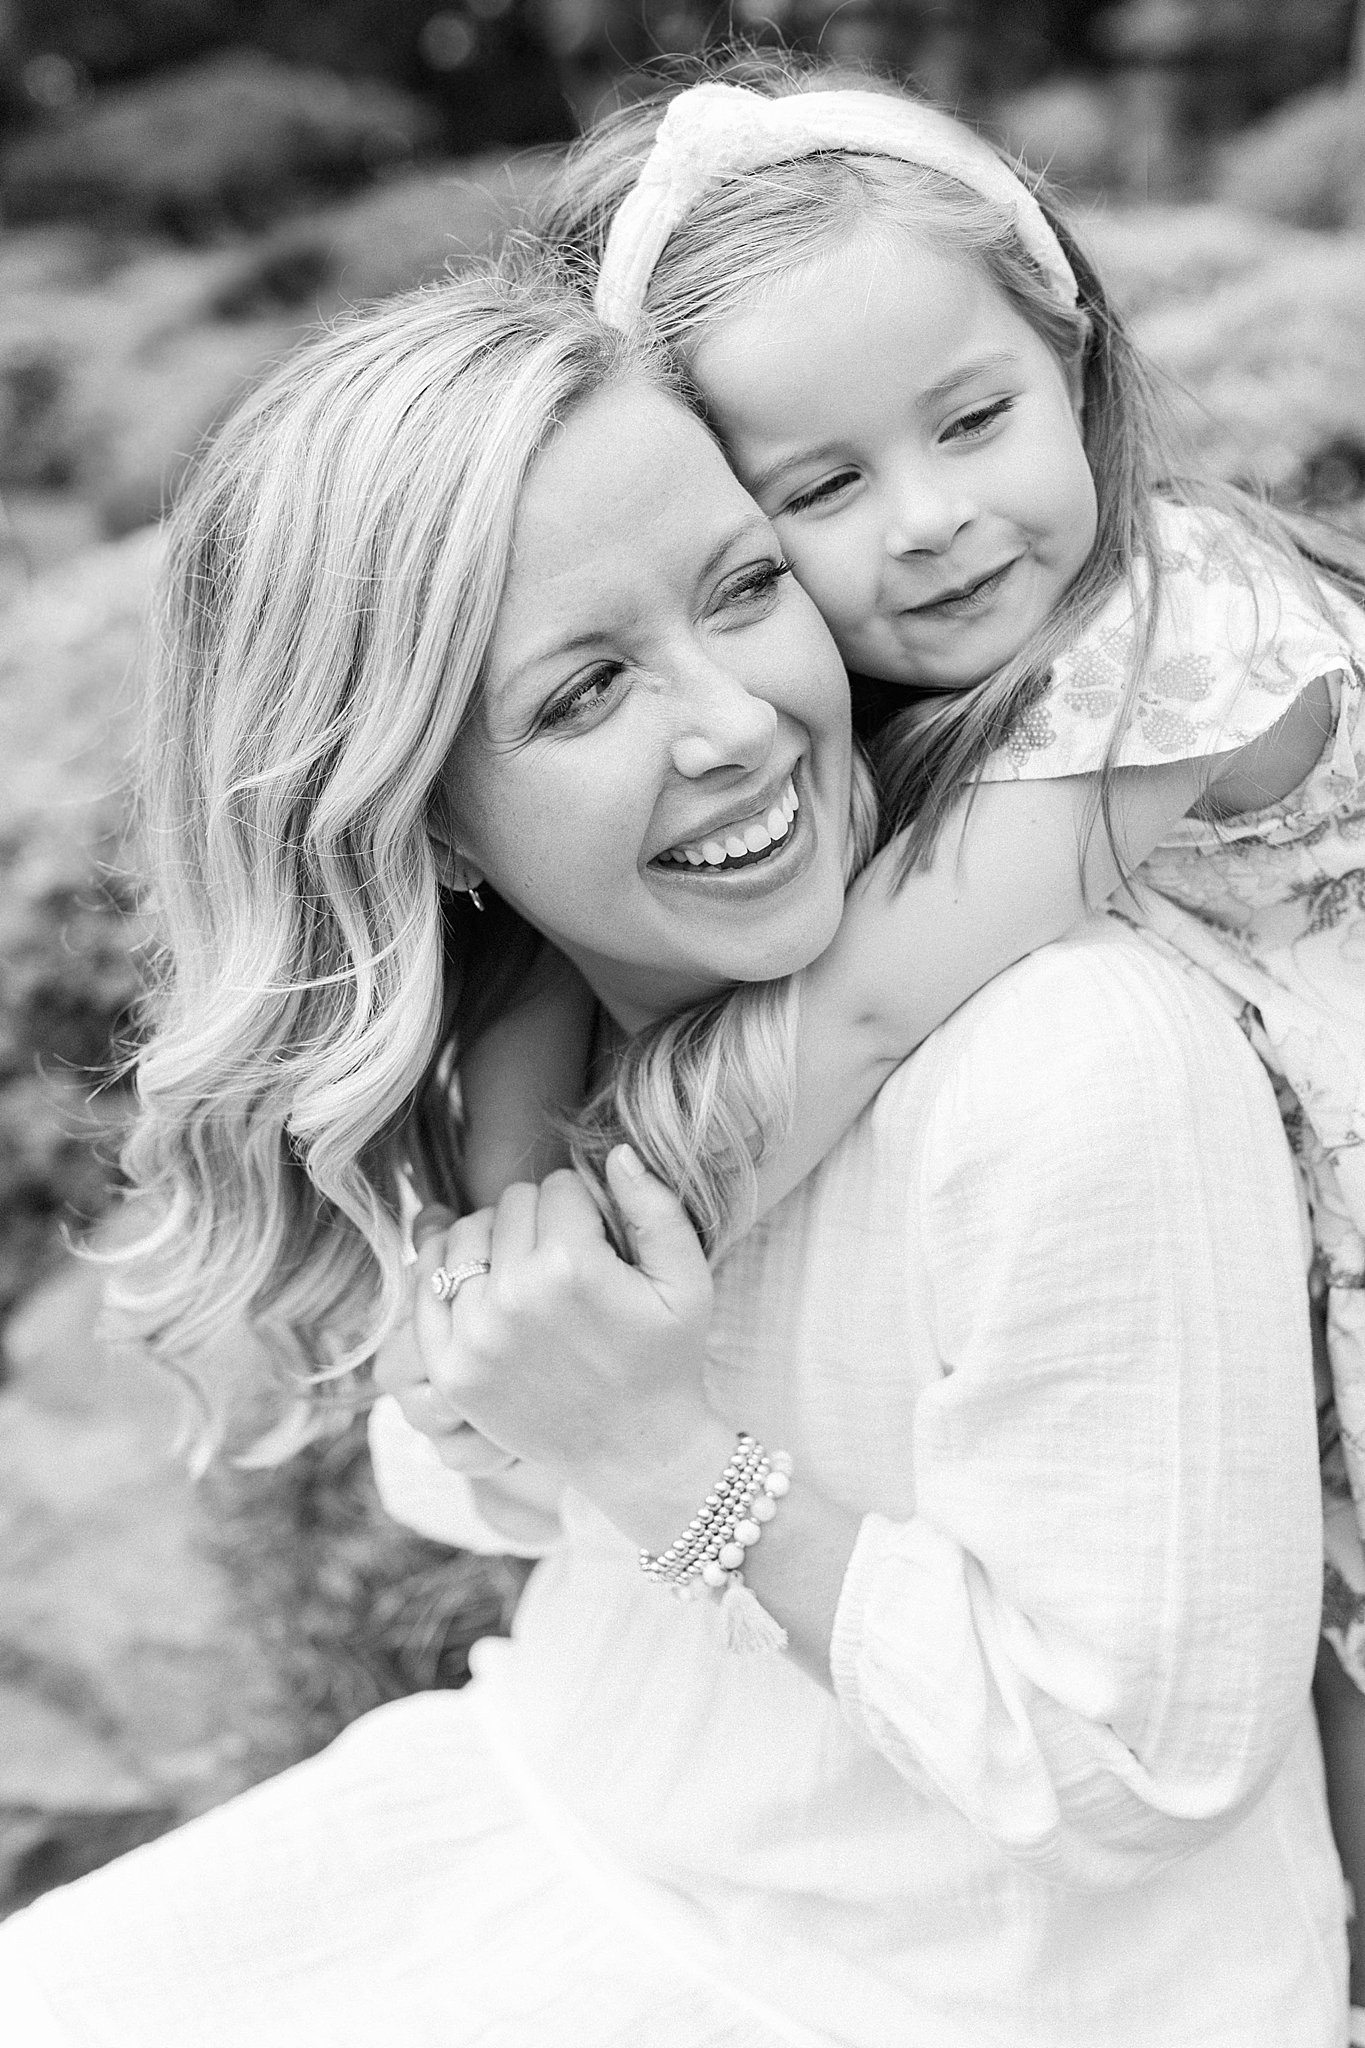 Mom and daughter smiling and hugging during outdoor family pictures.